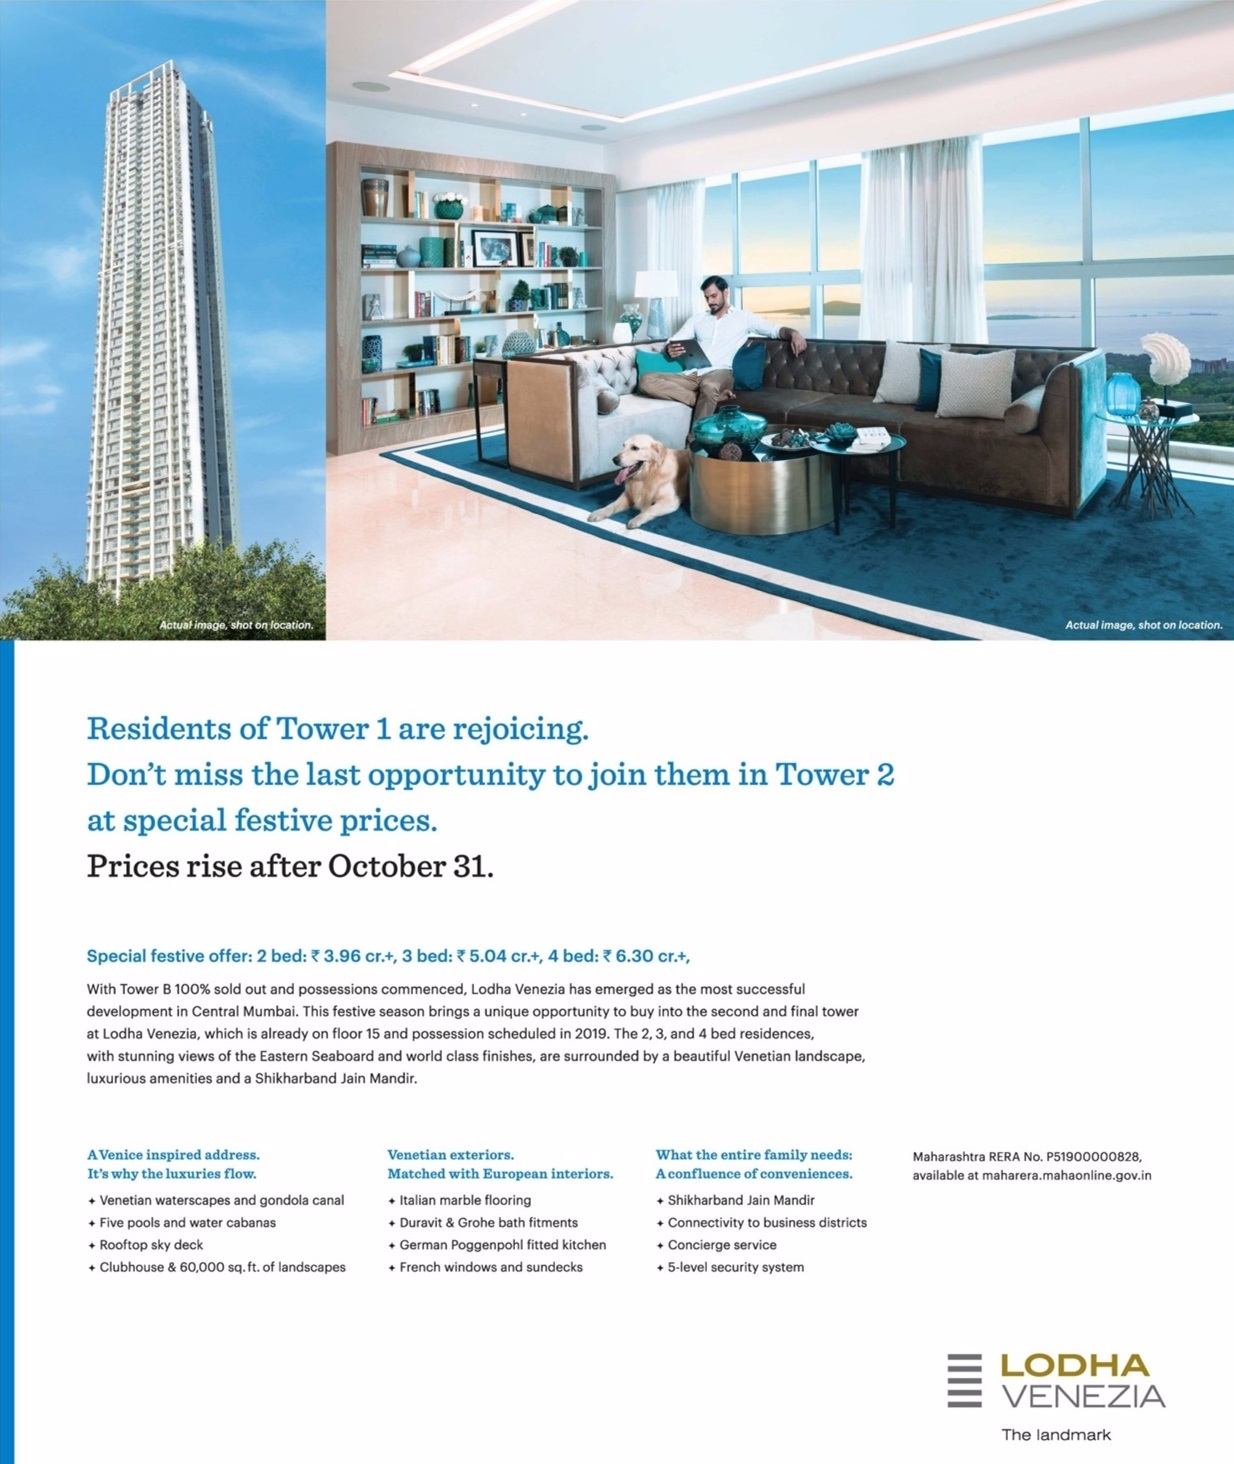 Residents of Tower 1 are rejoicing don't miss the last opportunity to join them in Tower 2 at Lodha Venezia, Mumbai